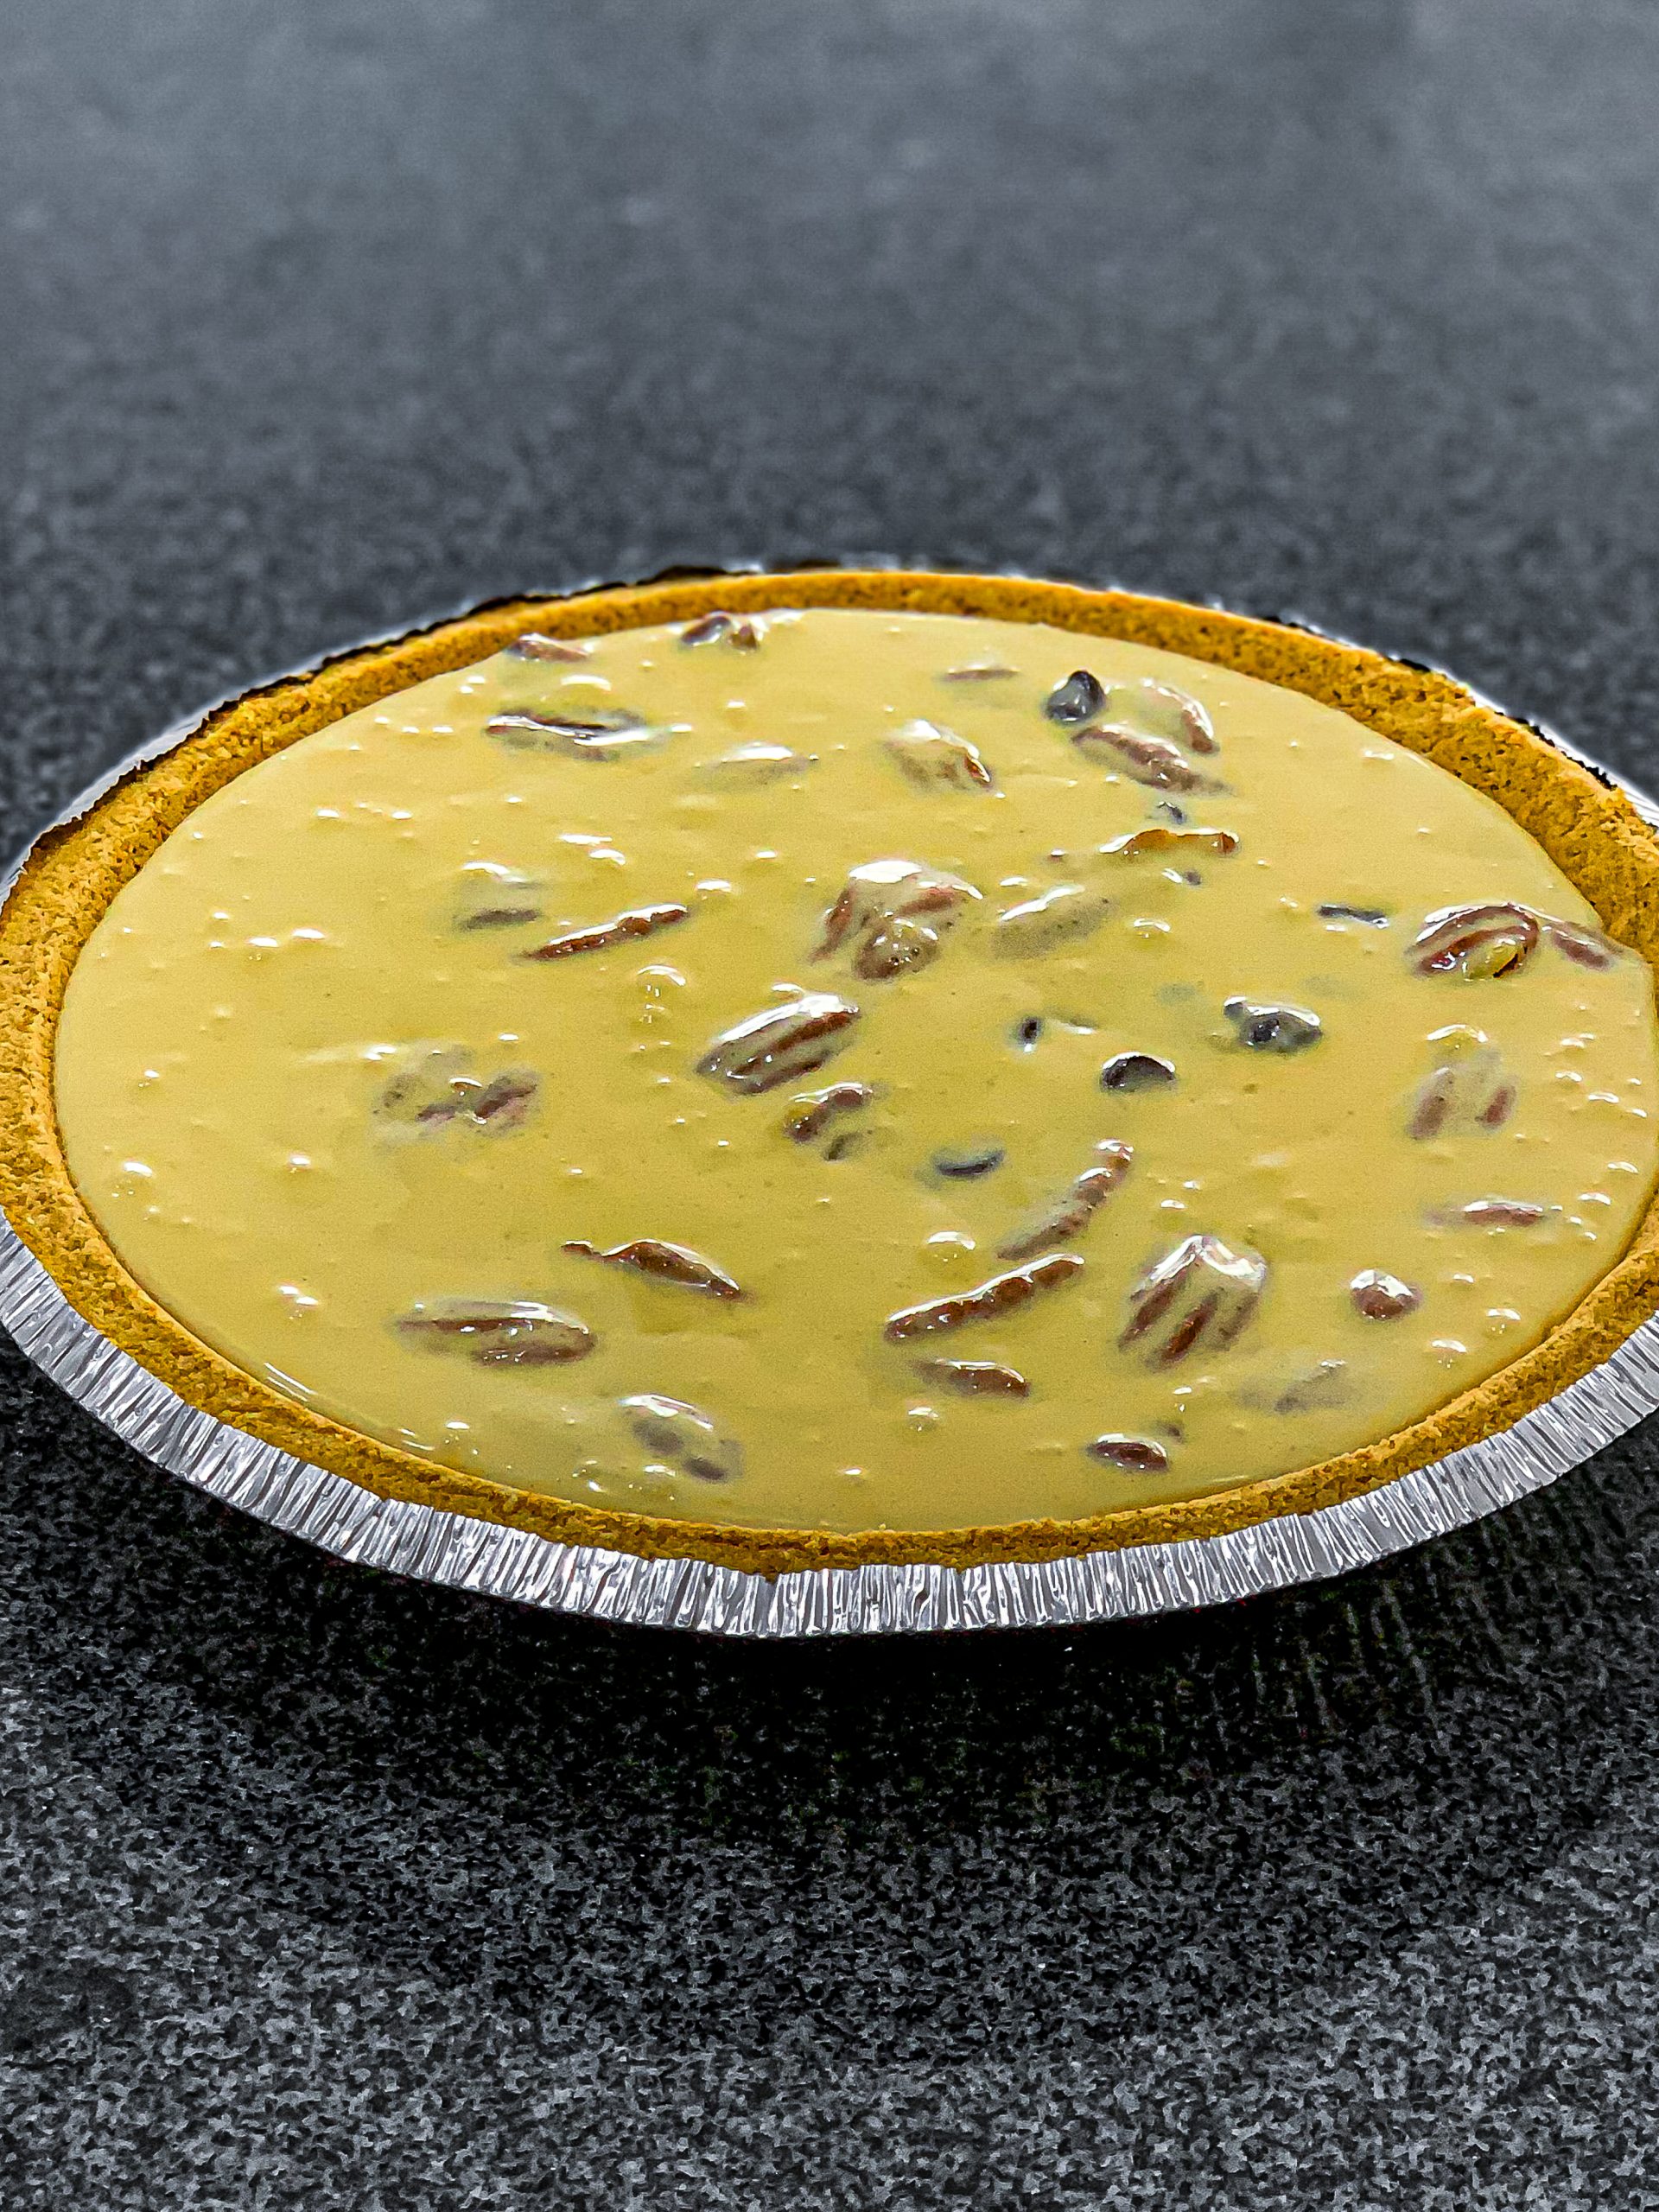 Pour the mixture into the unbaked pie shell.